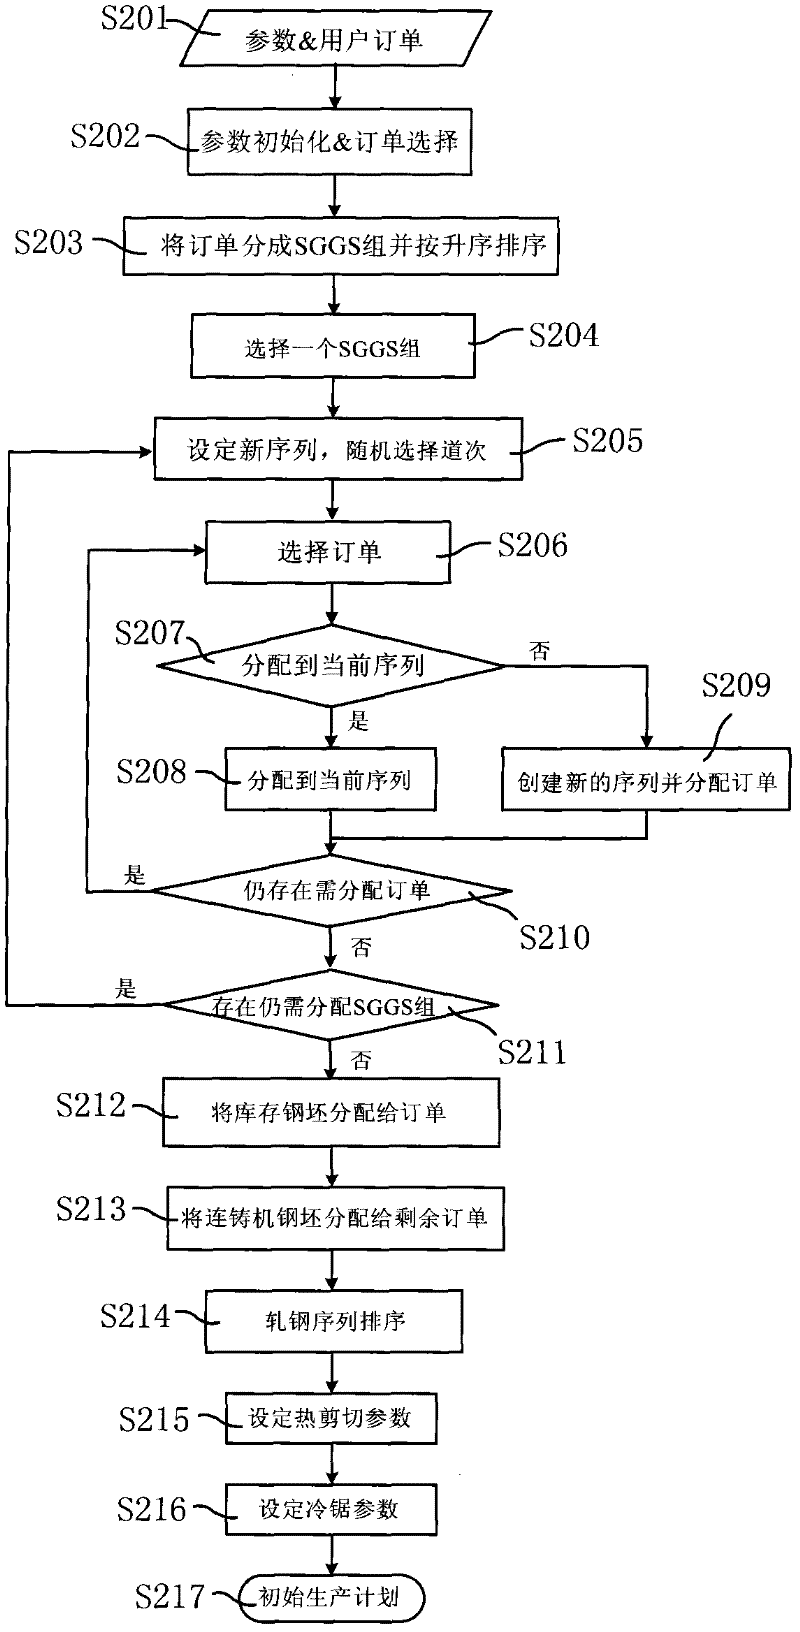 Method and system for scheduling production of small-scale steel mill